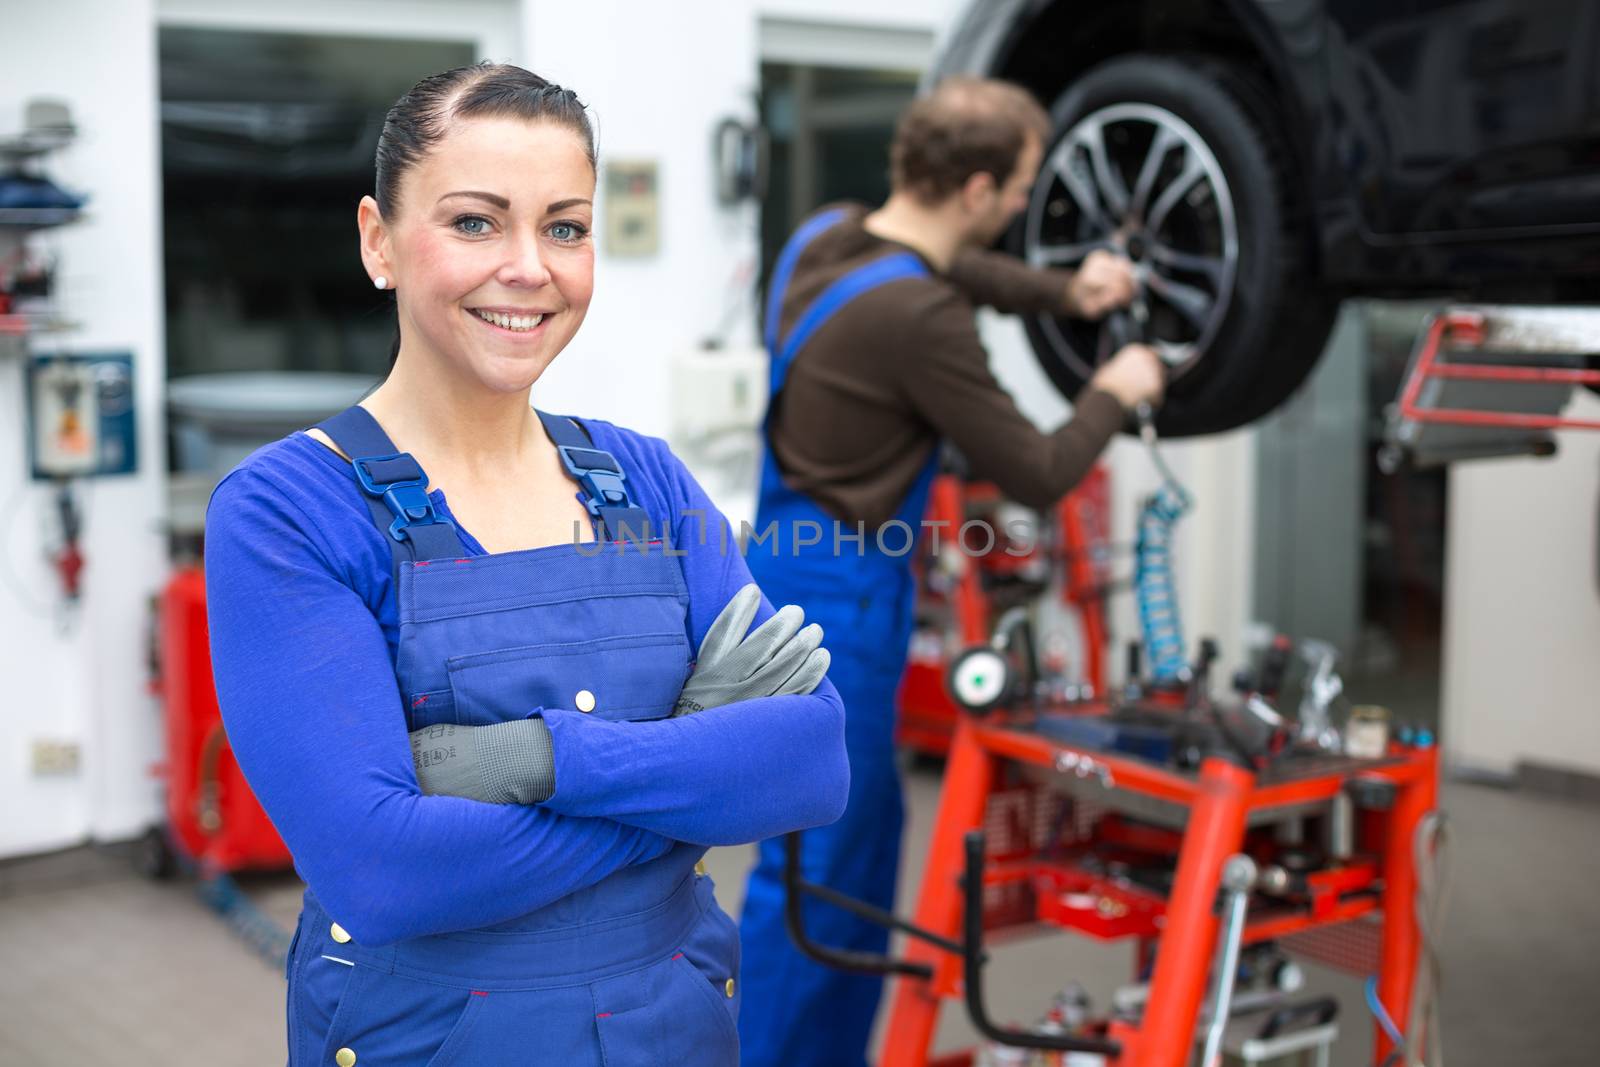 Female mechanic standing in workshop, another mechanic changes a wheel at a car on a hydraulic lift